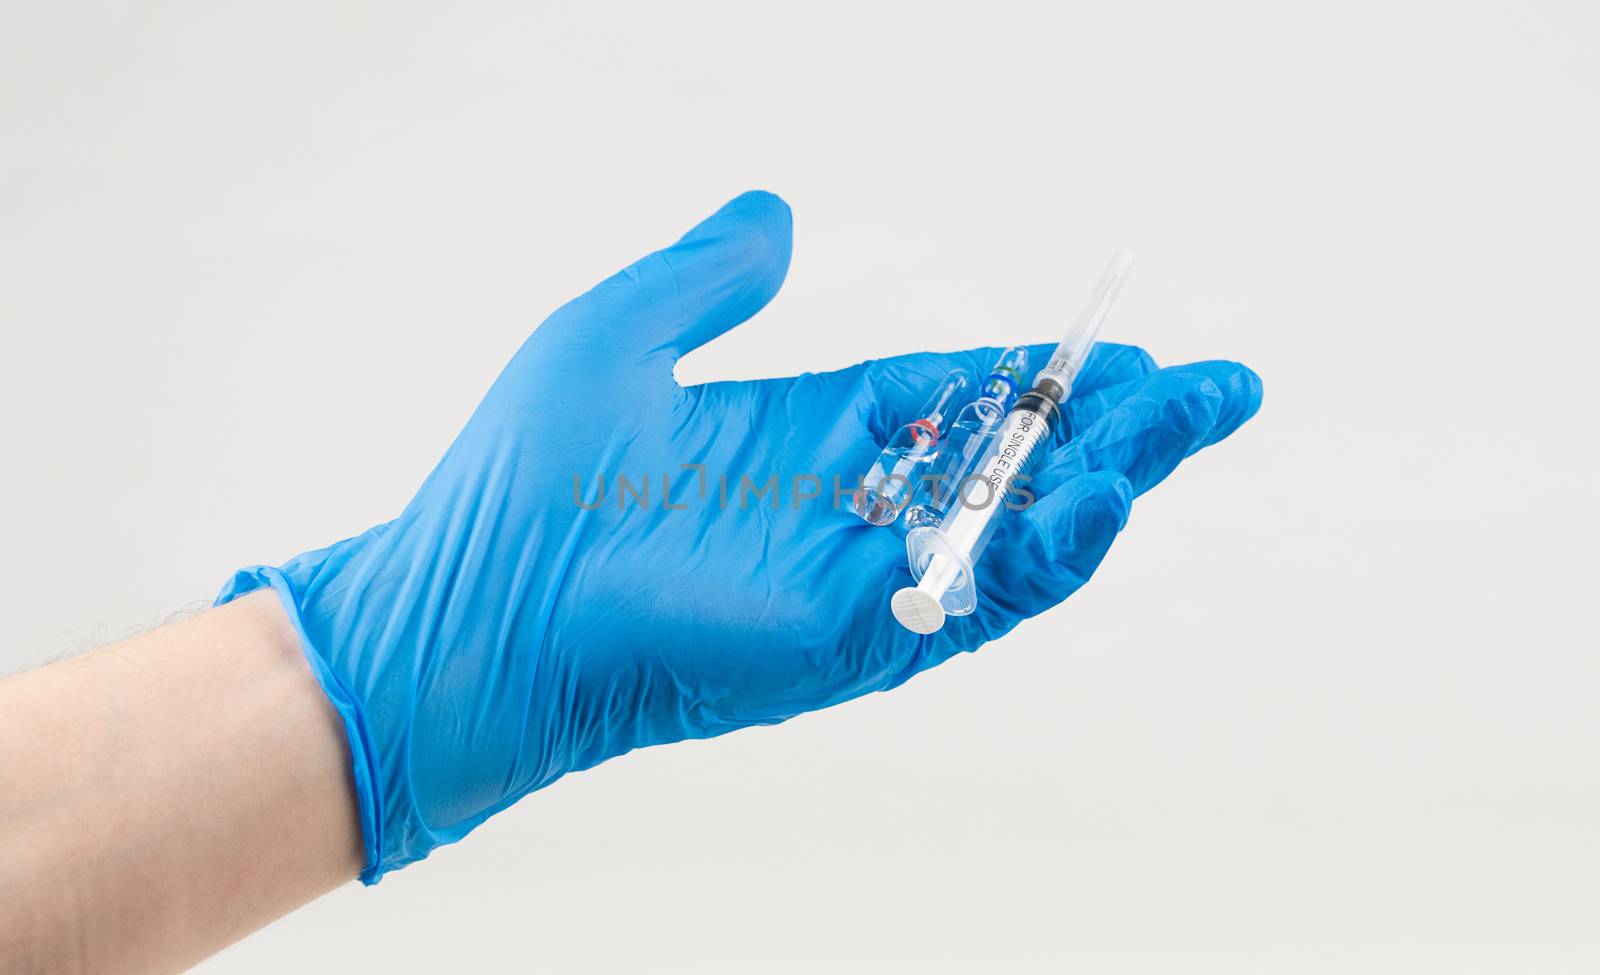 syringe and vaccine capsules by A_Karim